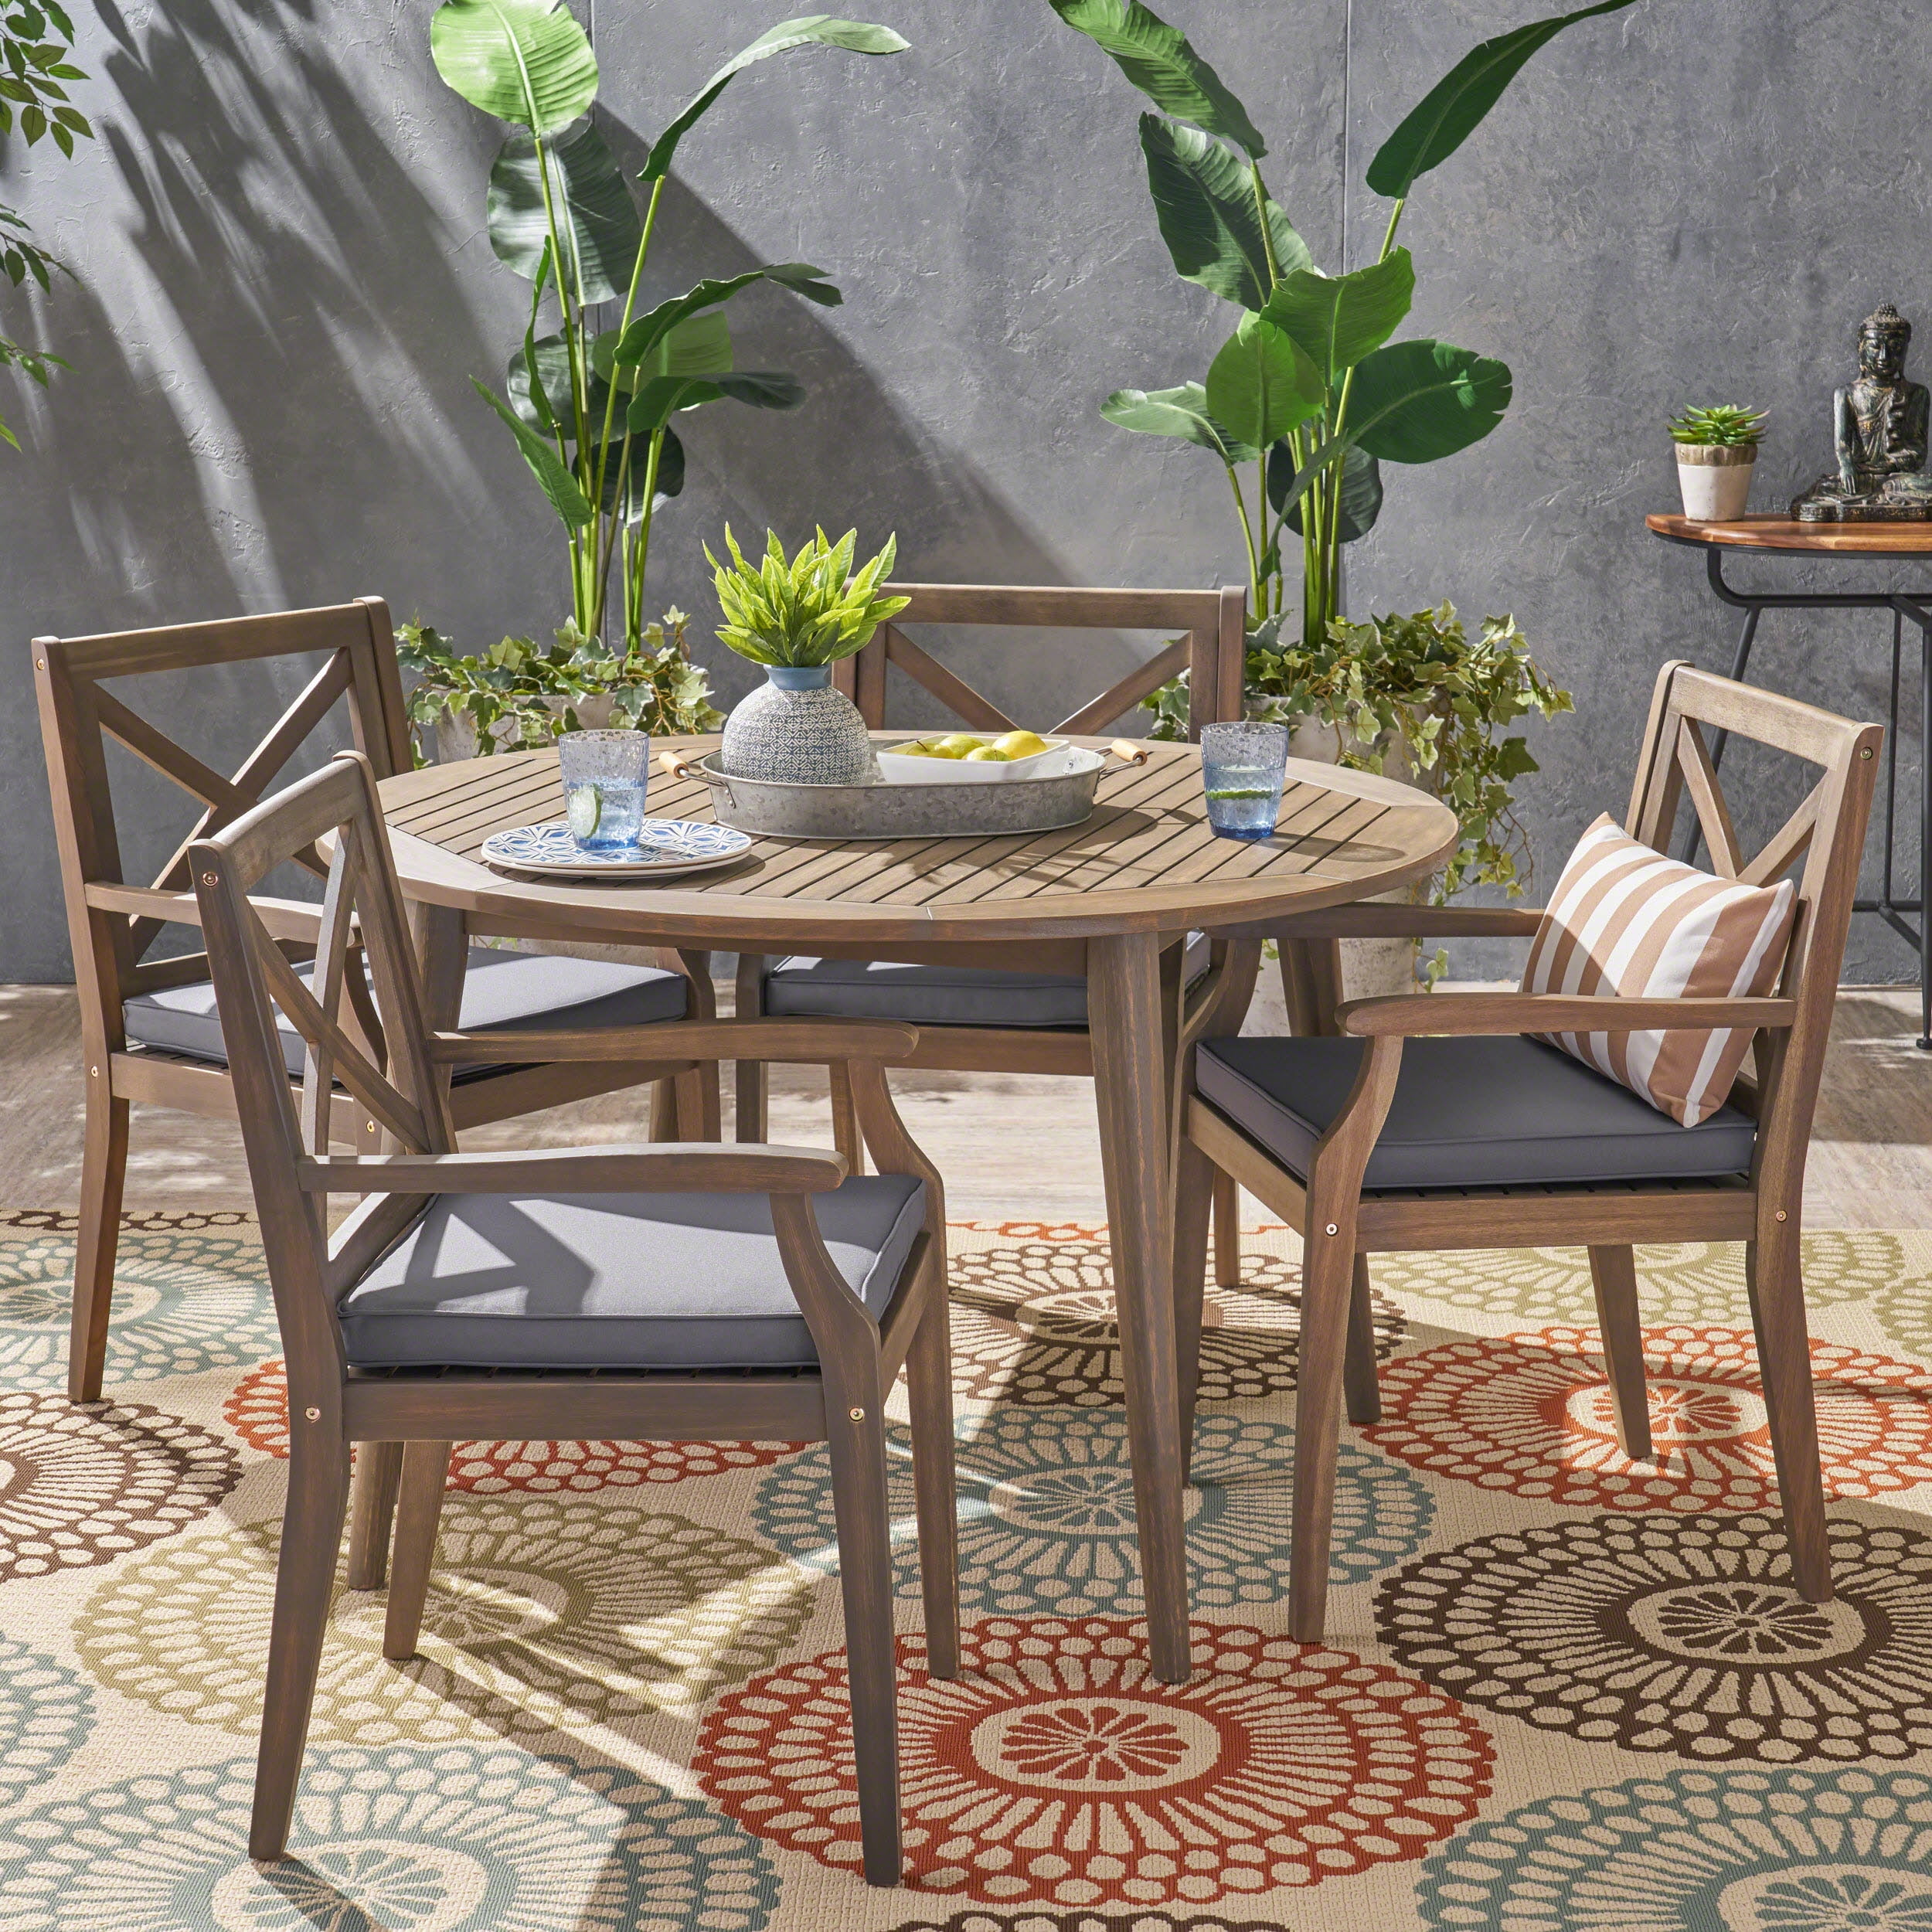 Oakley Outdoor 5 Piece Acacia Wood Round Dining Set with Cushions